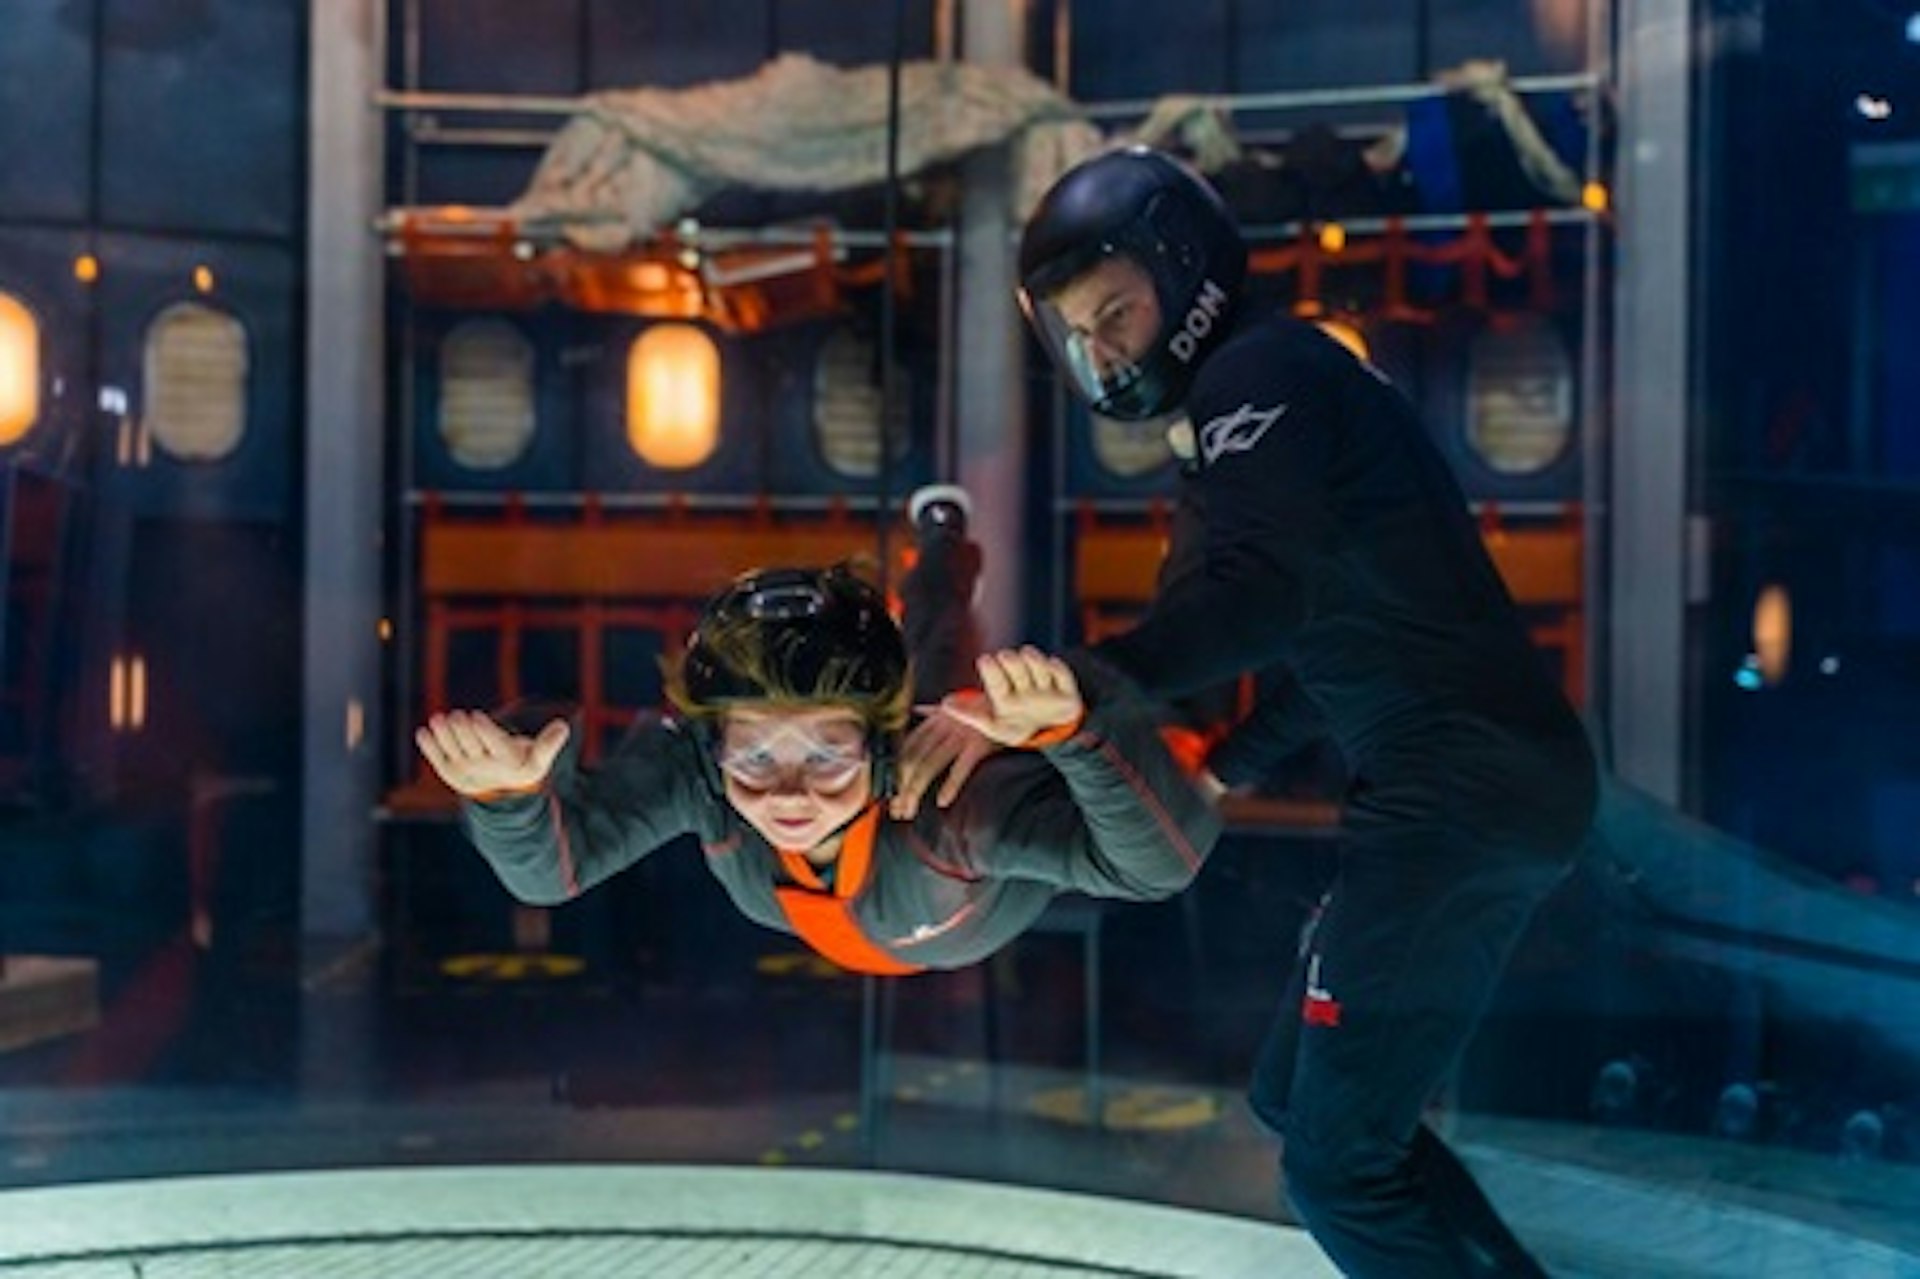 iFly Indoor Skydiving and High Ropes for Two at The Bear Grylls Adventure 1